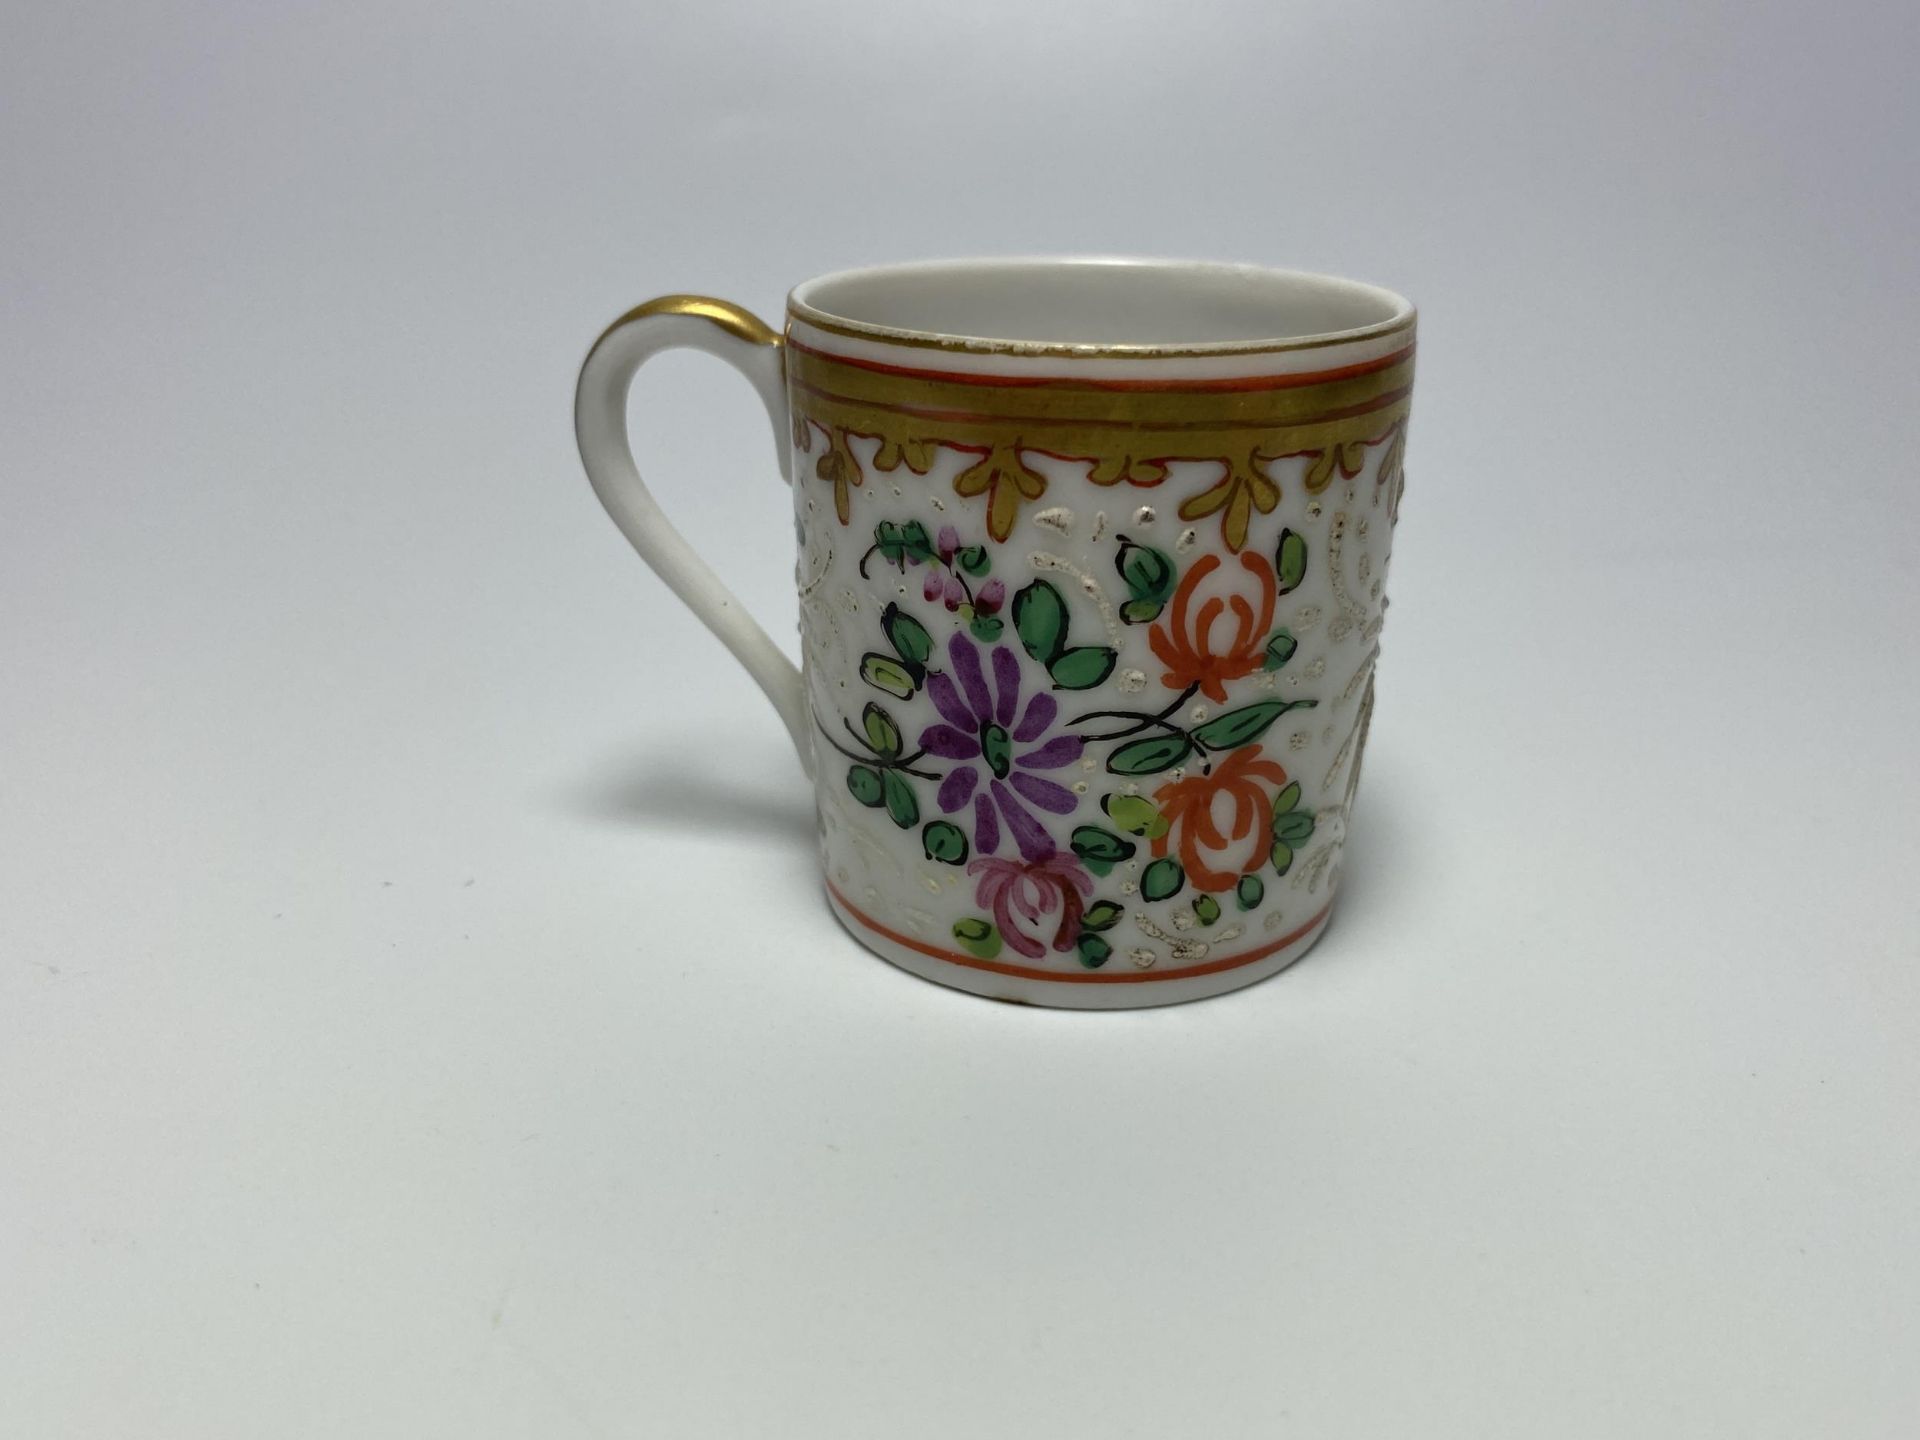 A MINIATURE 19TH CENTURY CHINESE EXPORT PORCELAIN TANKARD, HEIGHT 4CM - Image 2 of 5